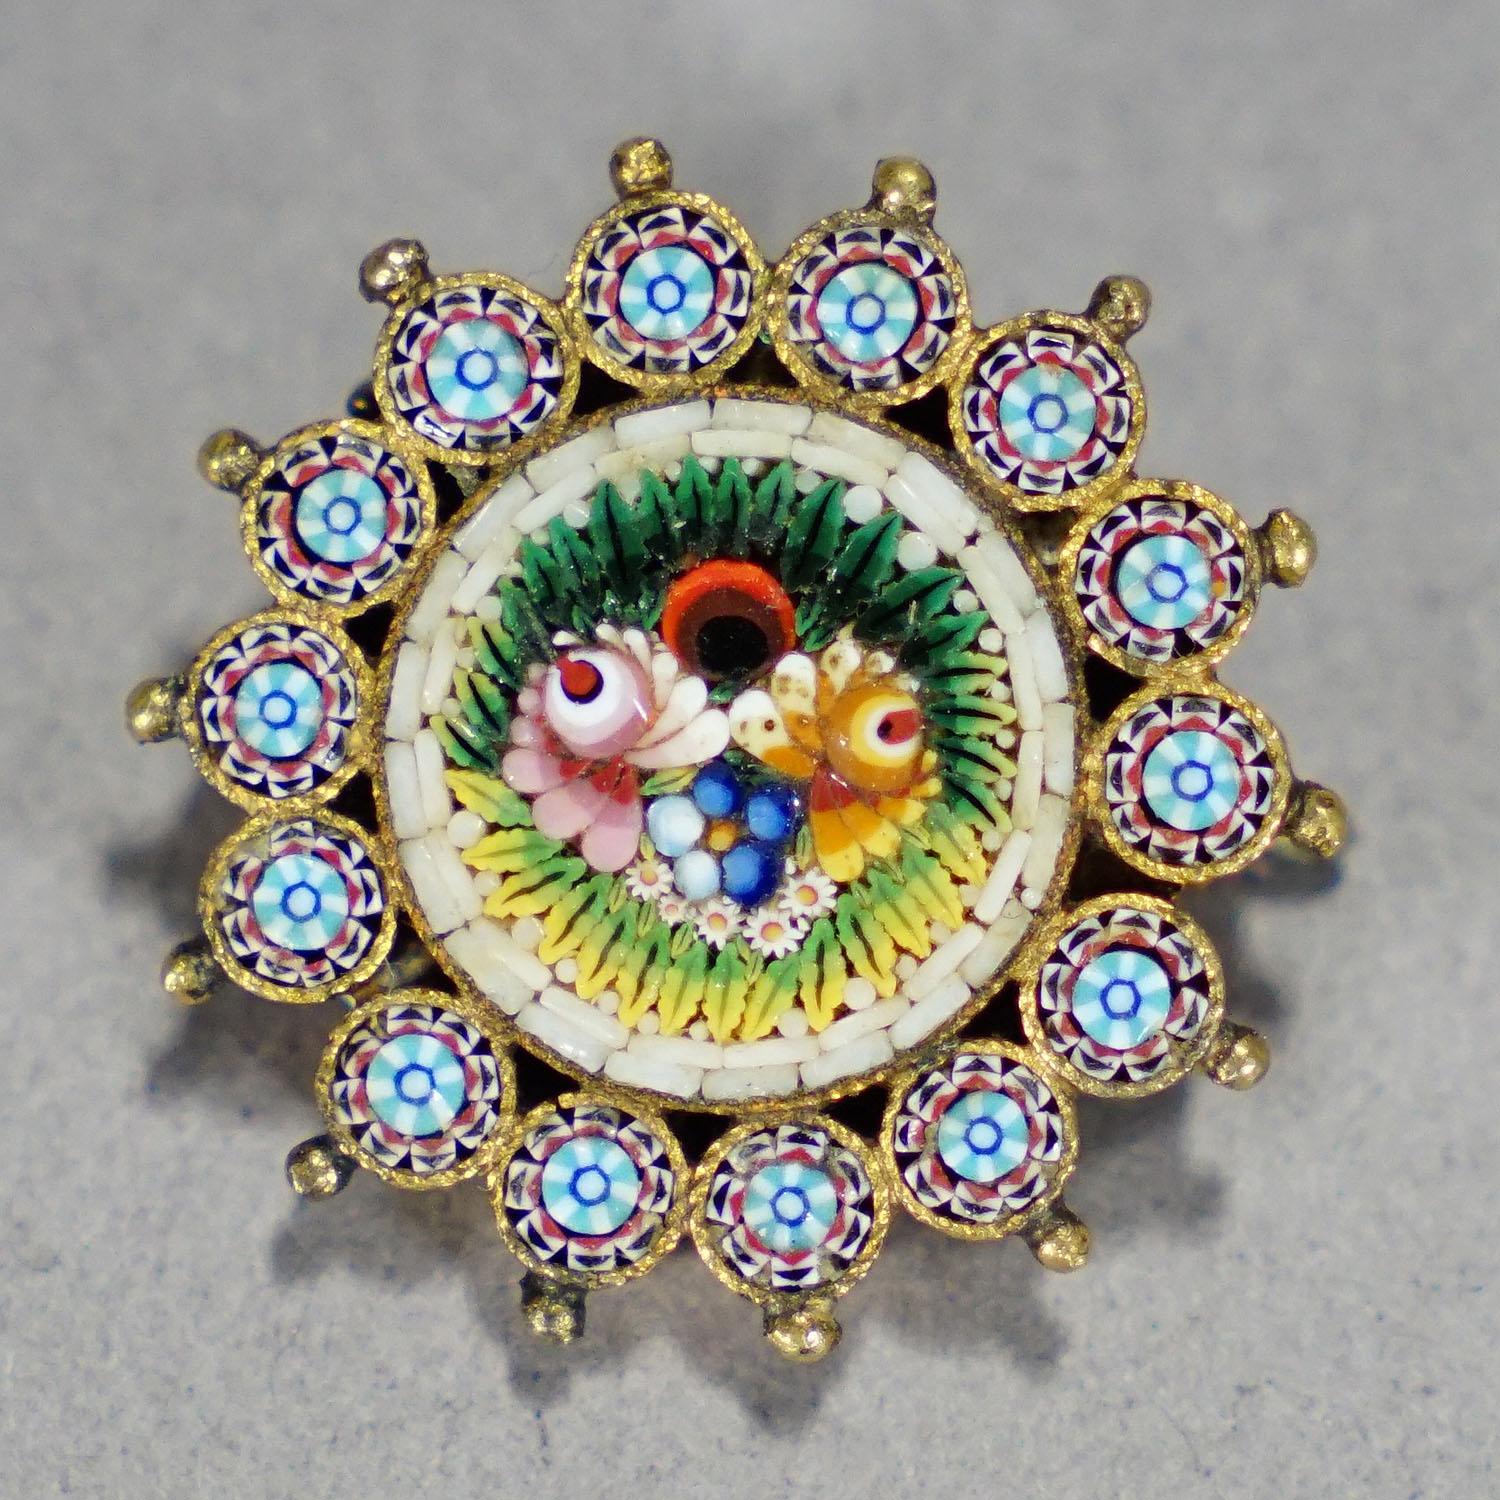 Italian Antique Victorian Micromosaic Gilded Brooch, Italy Early 20th Century For Sale